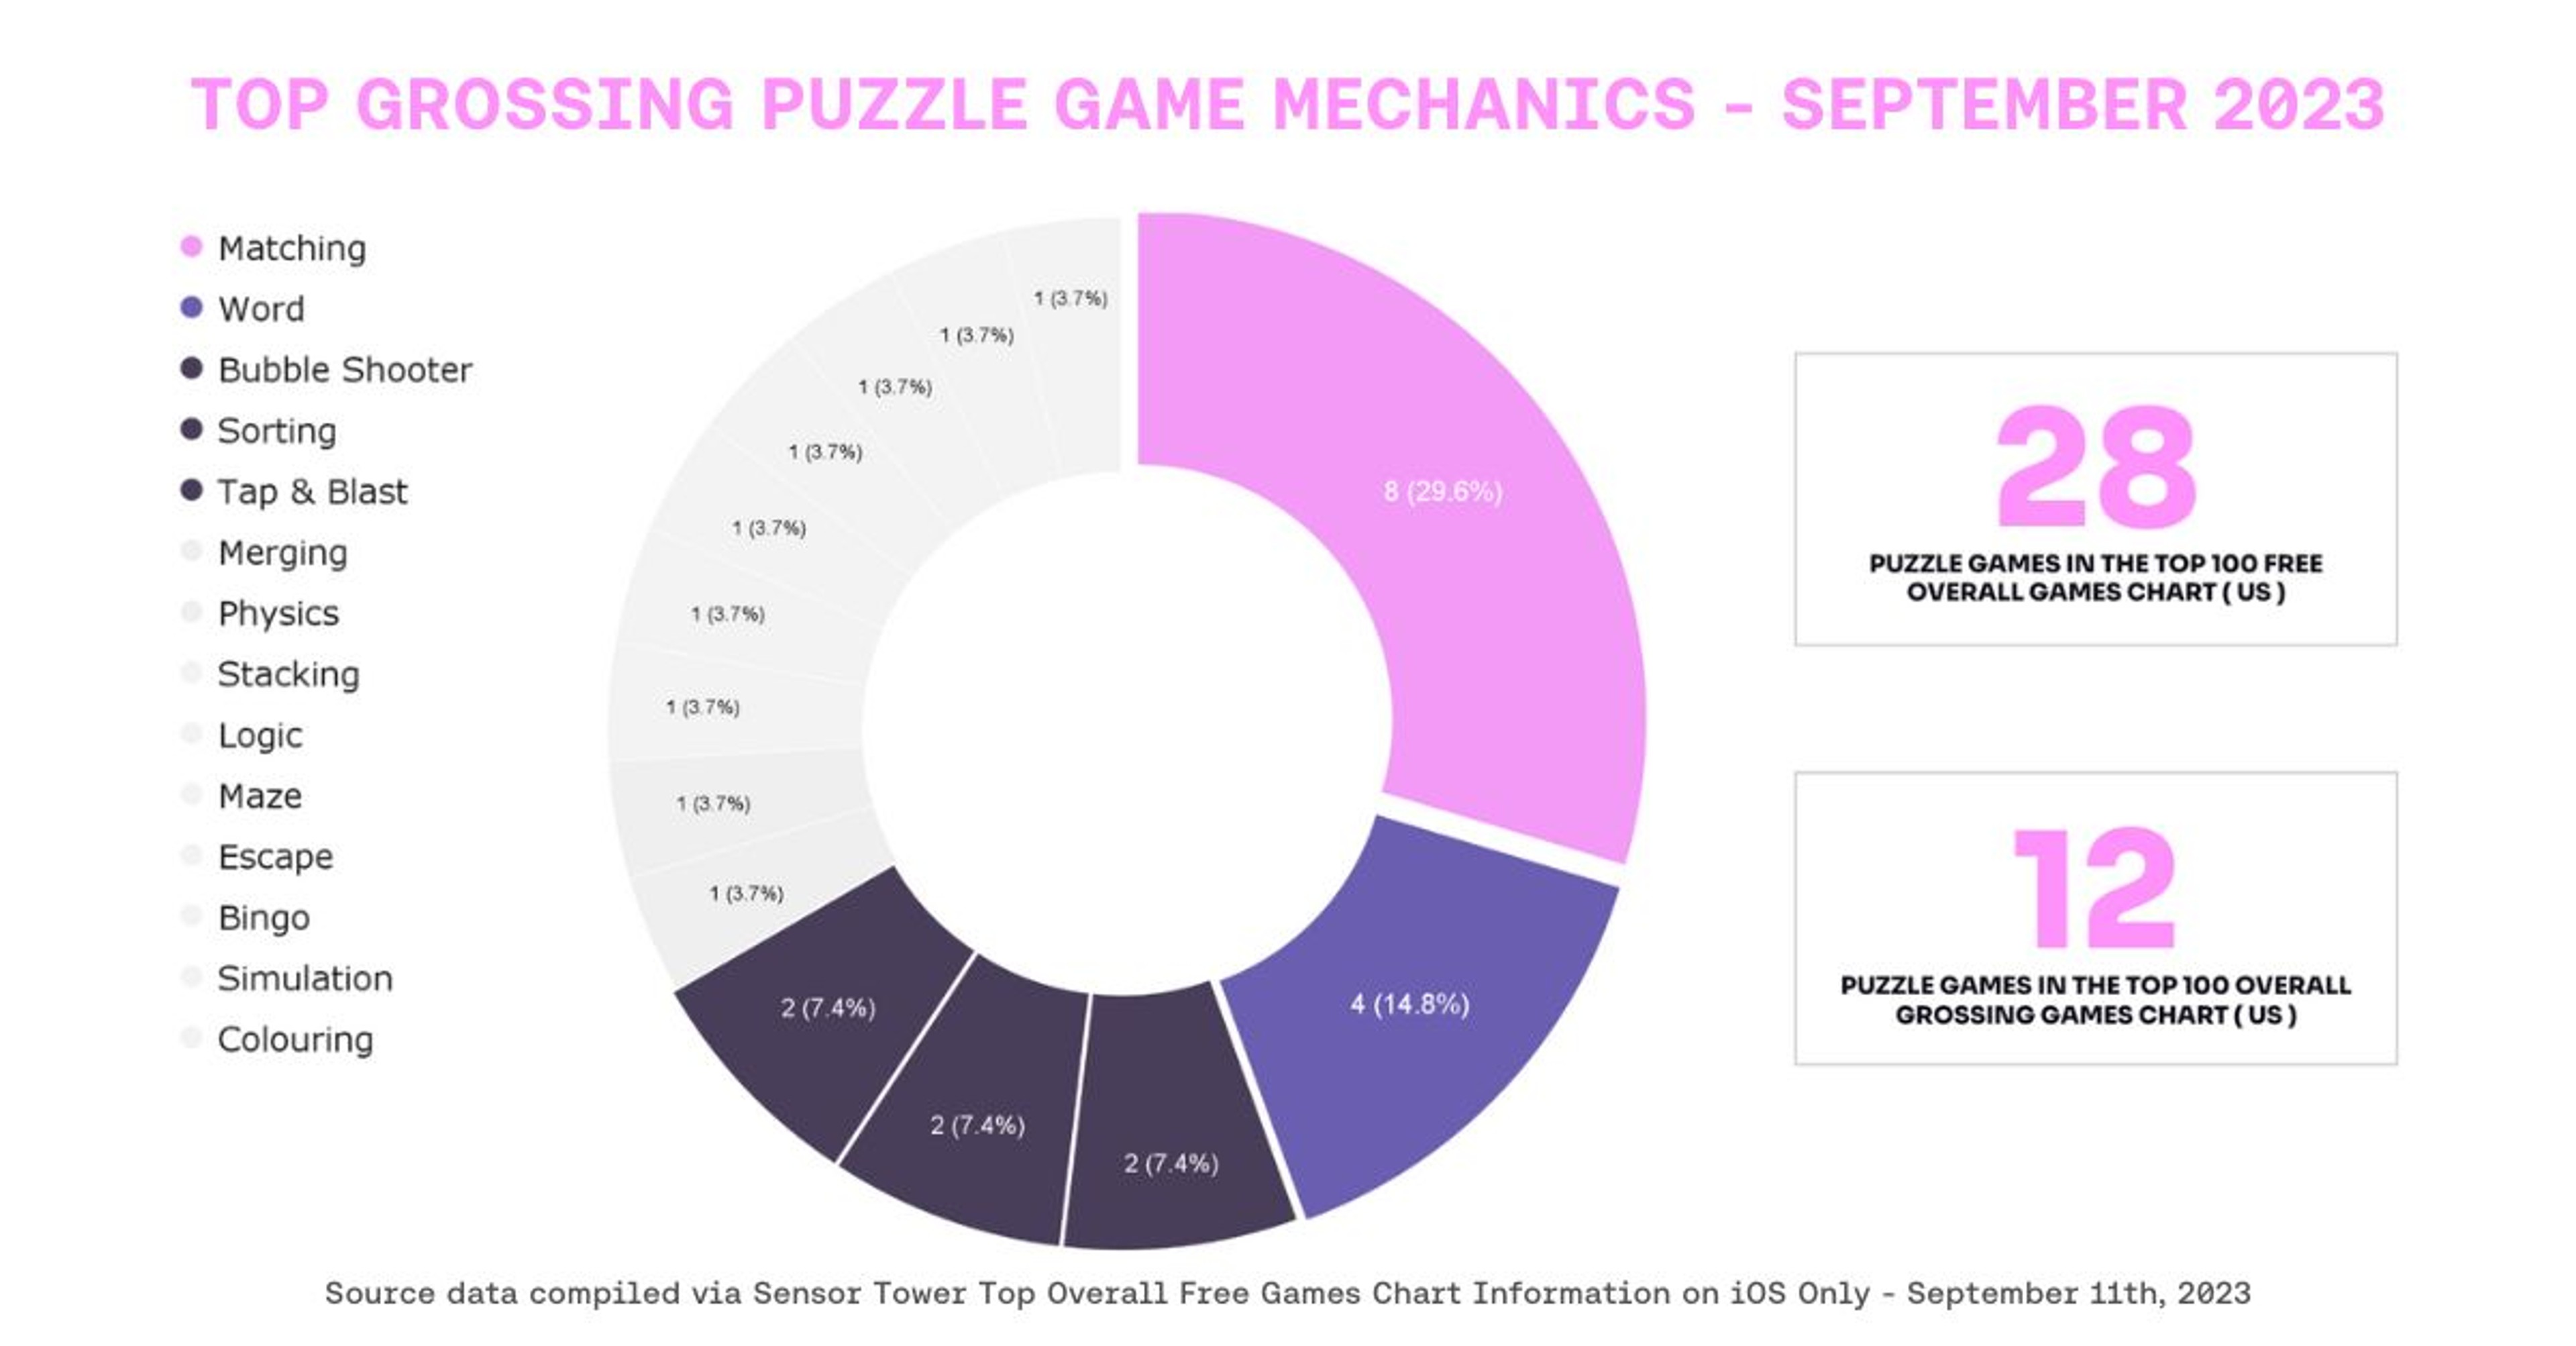 Top Grossing Puzzle Game Mechanics